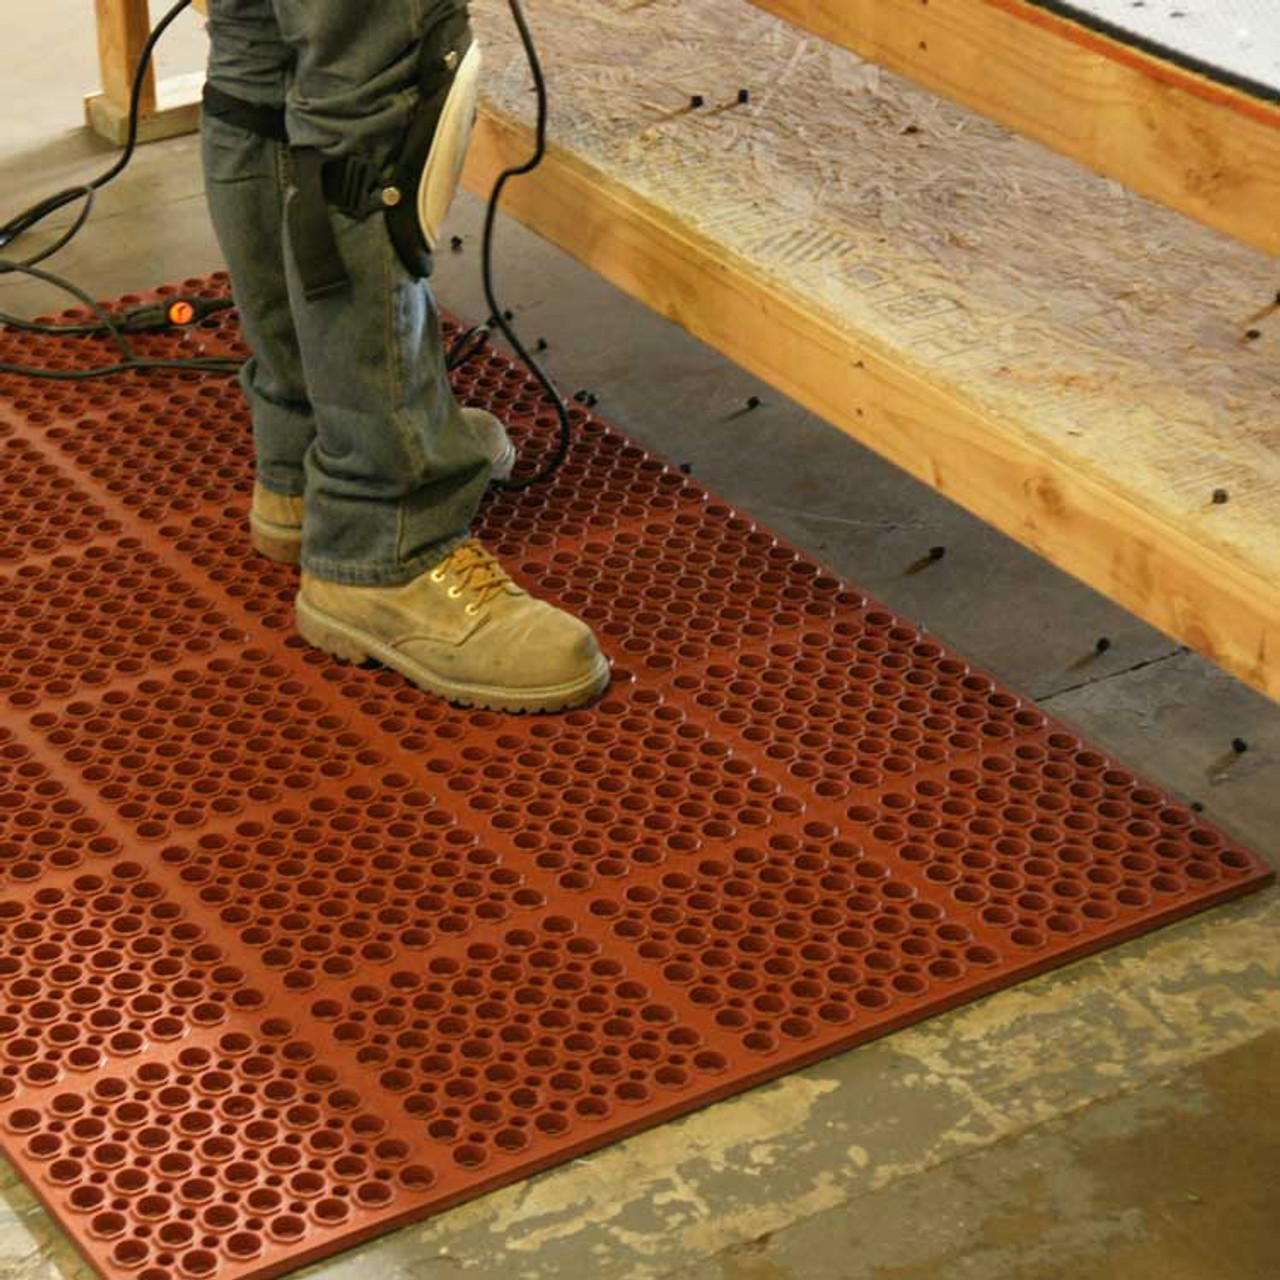 Rubber-Cal 7/8 Dura Chef Rubber Comfort Kitchen Mat - Red